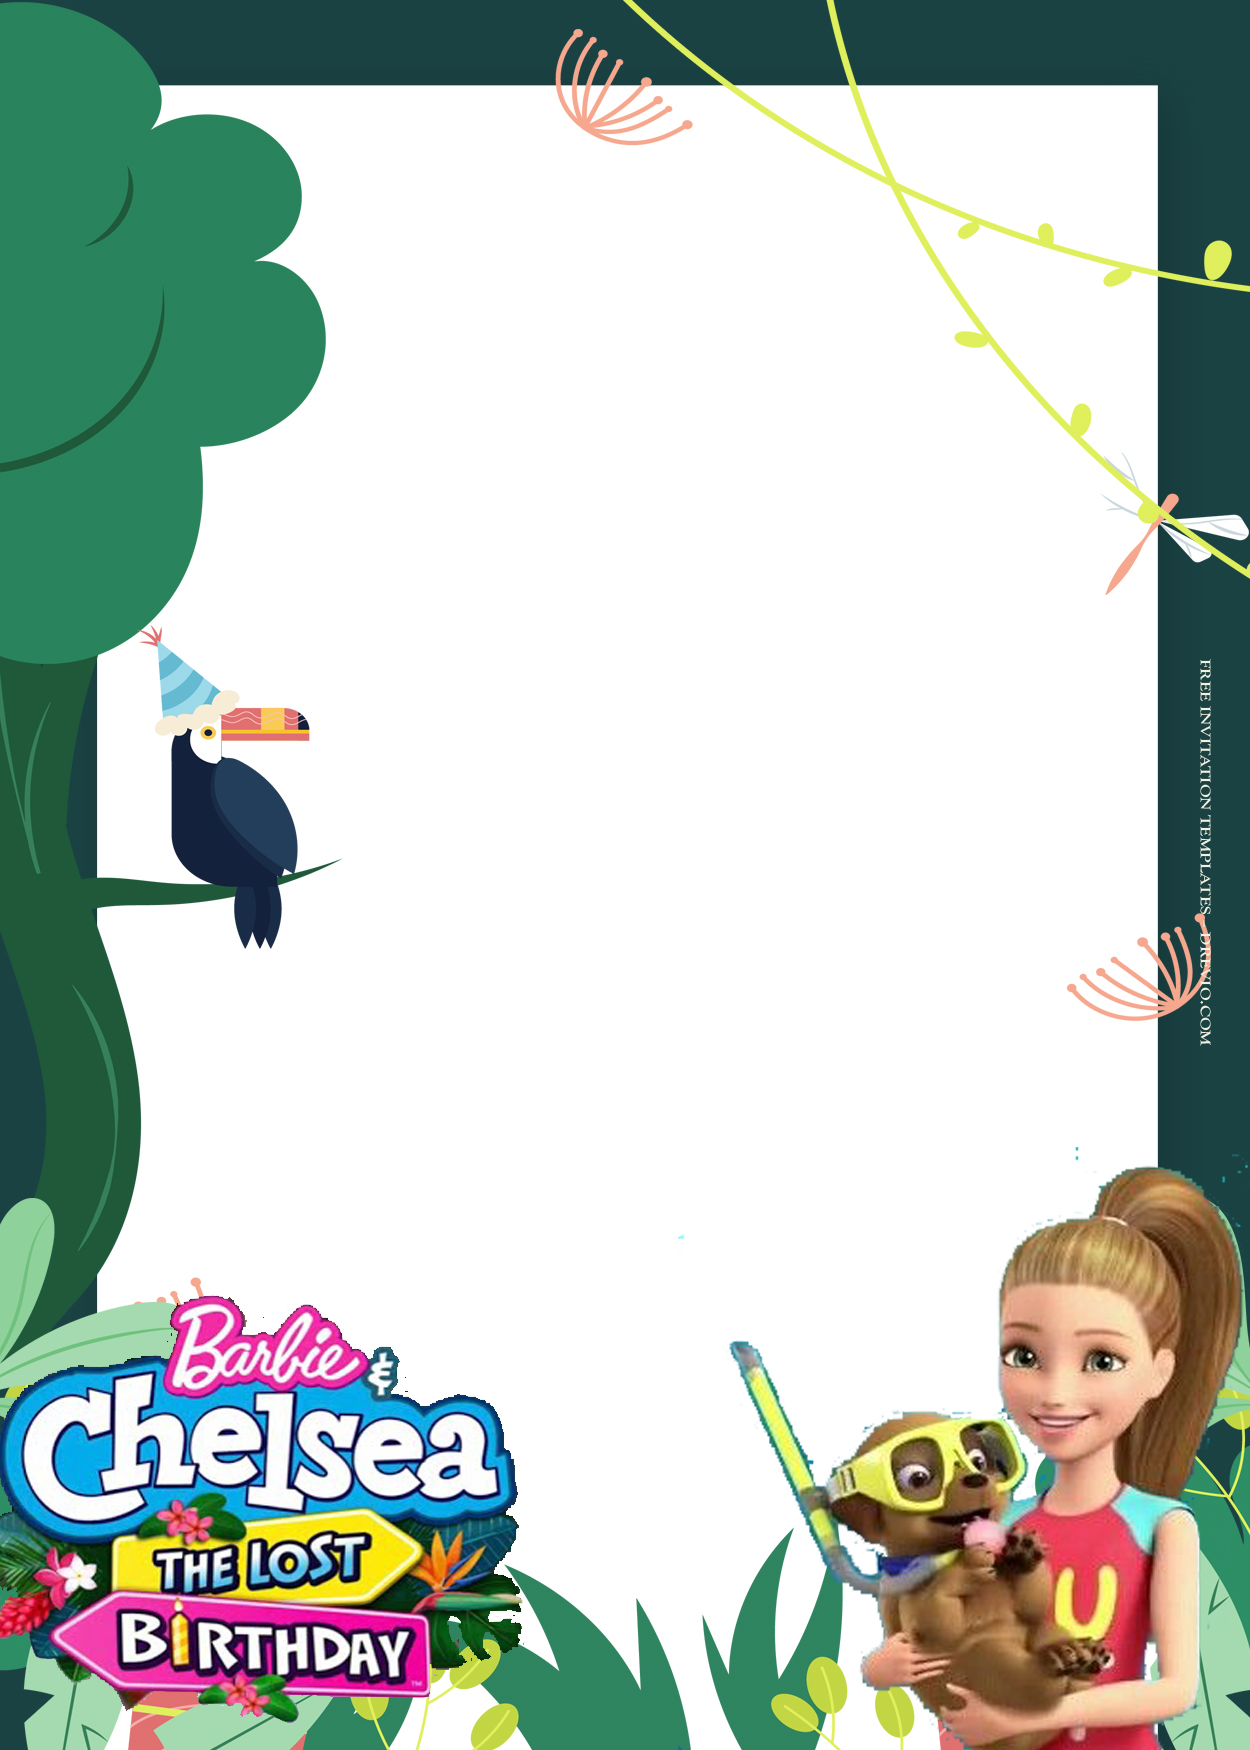 8+ Barbie And Chelsea The Lost Birthday Invitation Templates Six